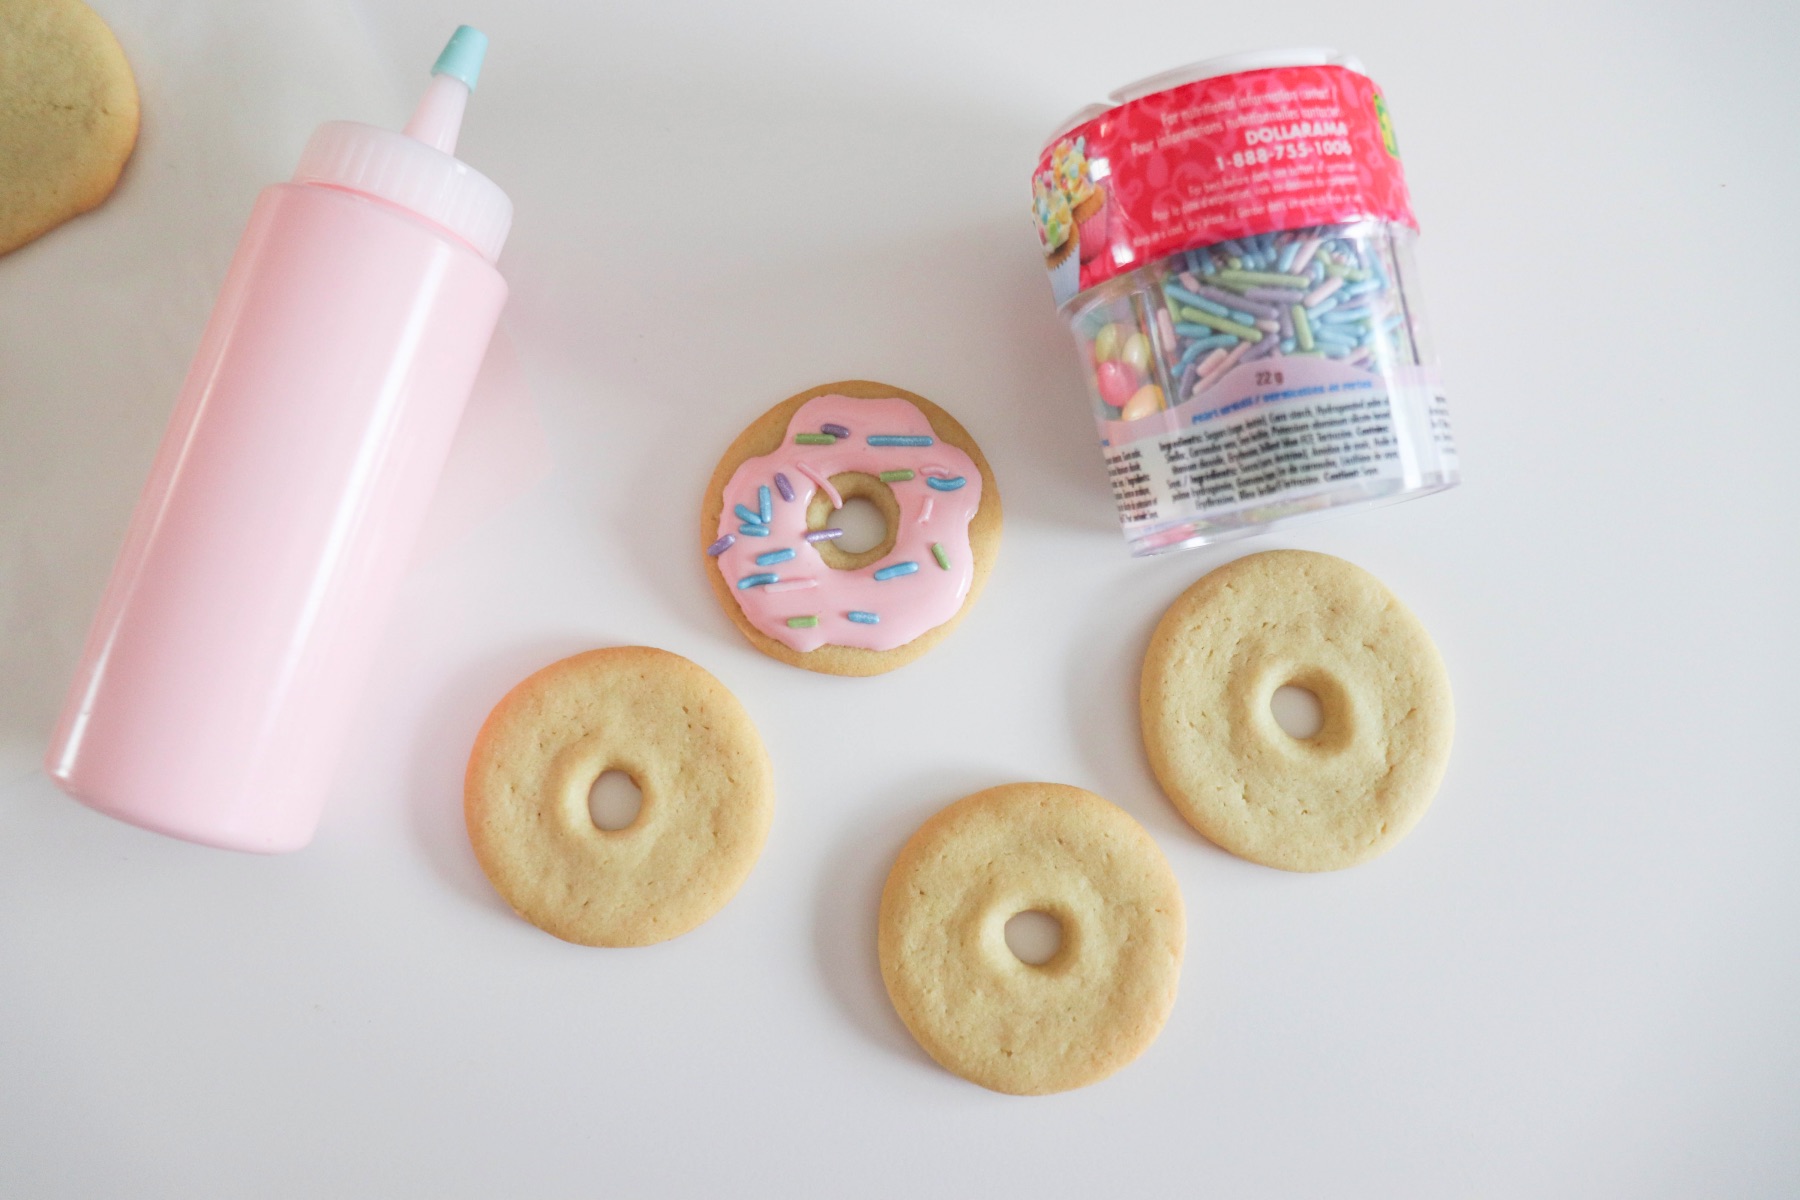 add the icing to the donut cookie to decorate